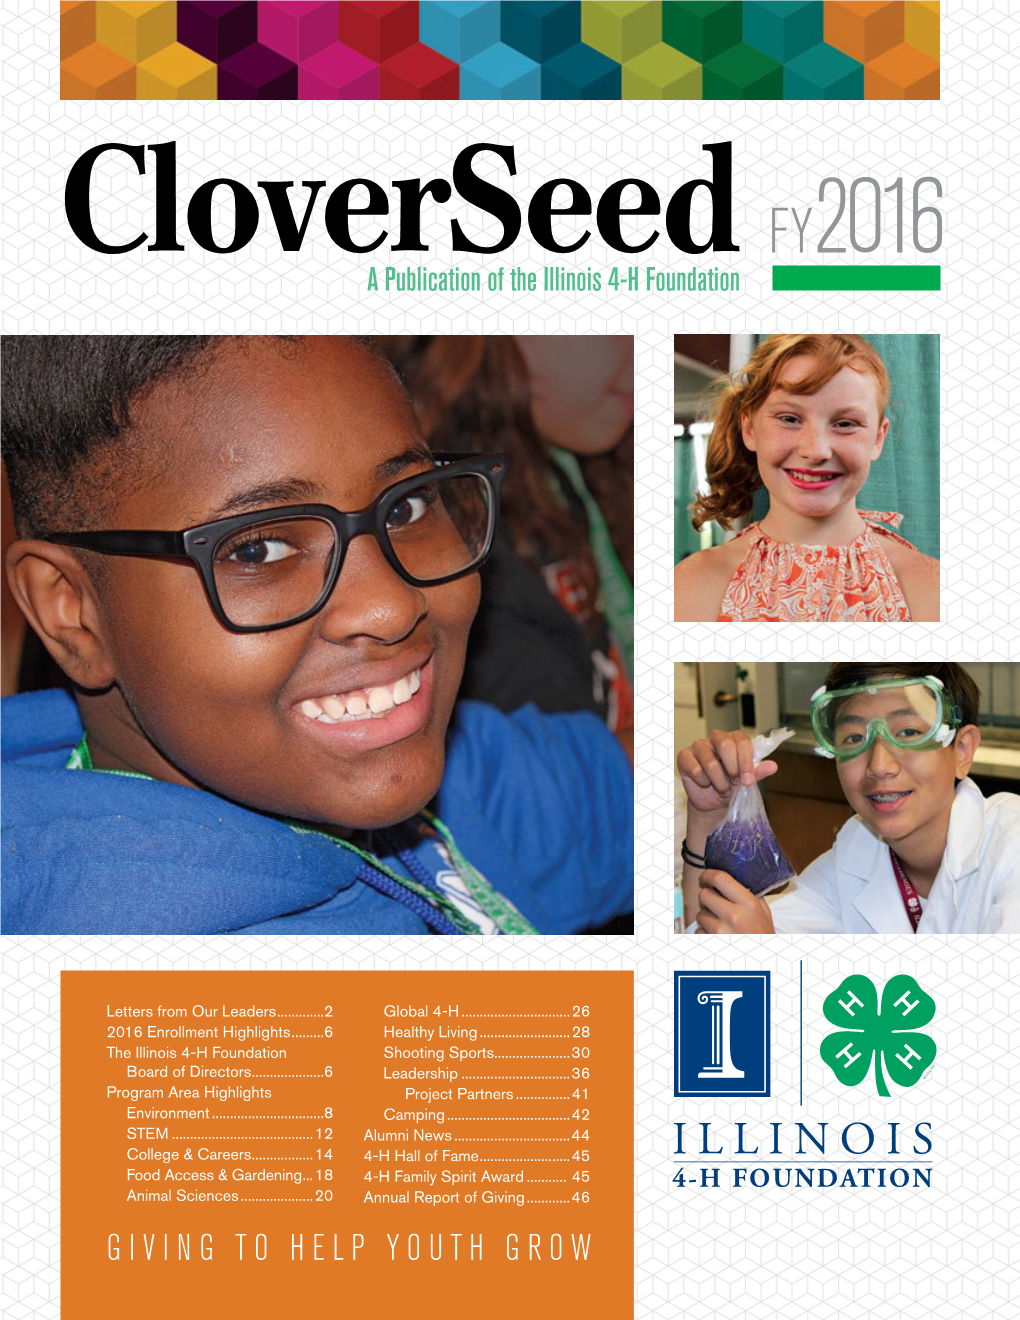 FY2016 a Publication of the Illinois 4-H Foundation